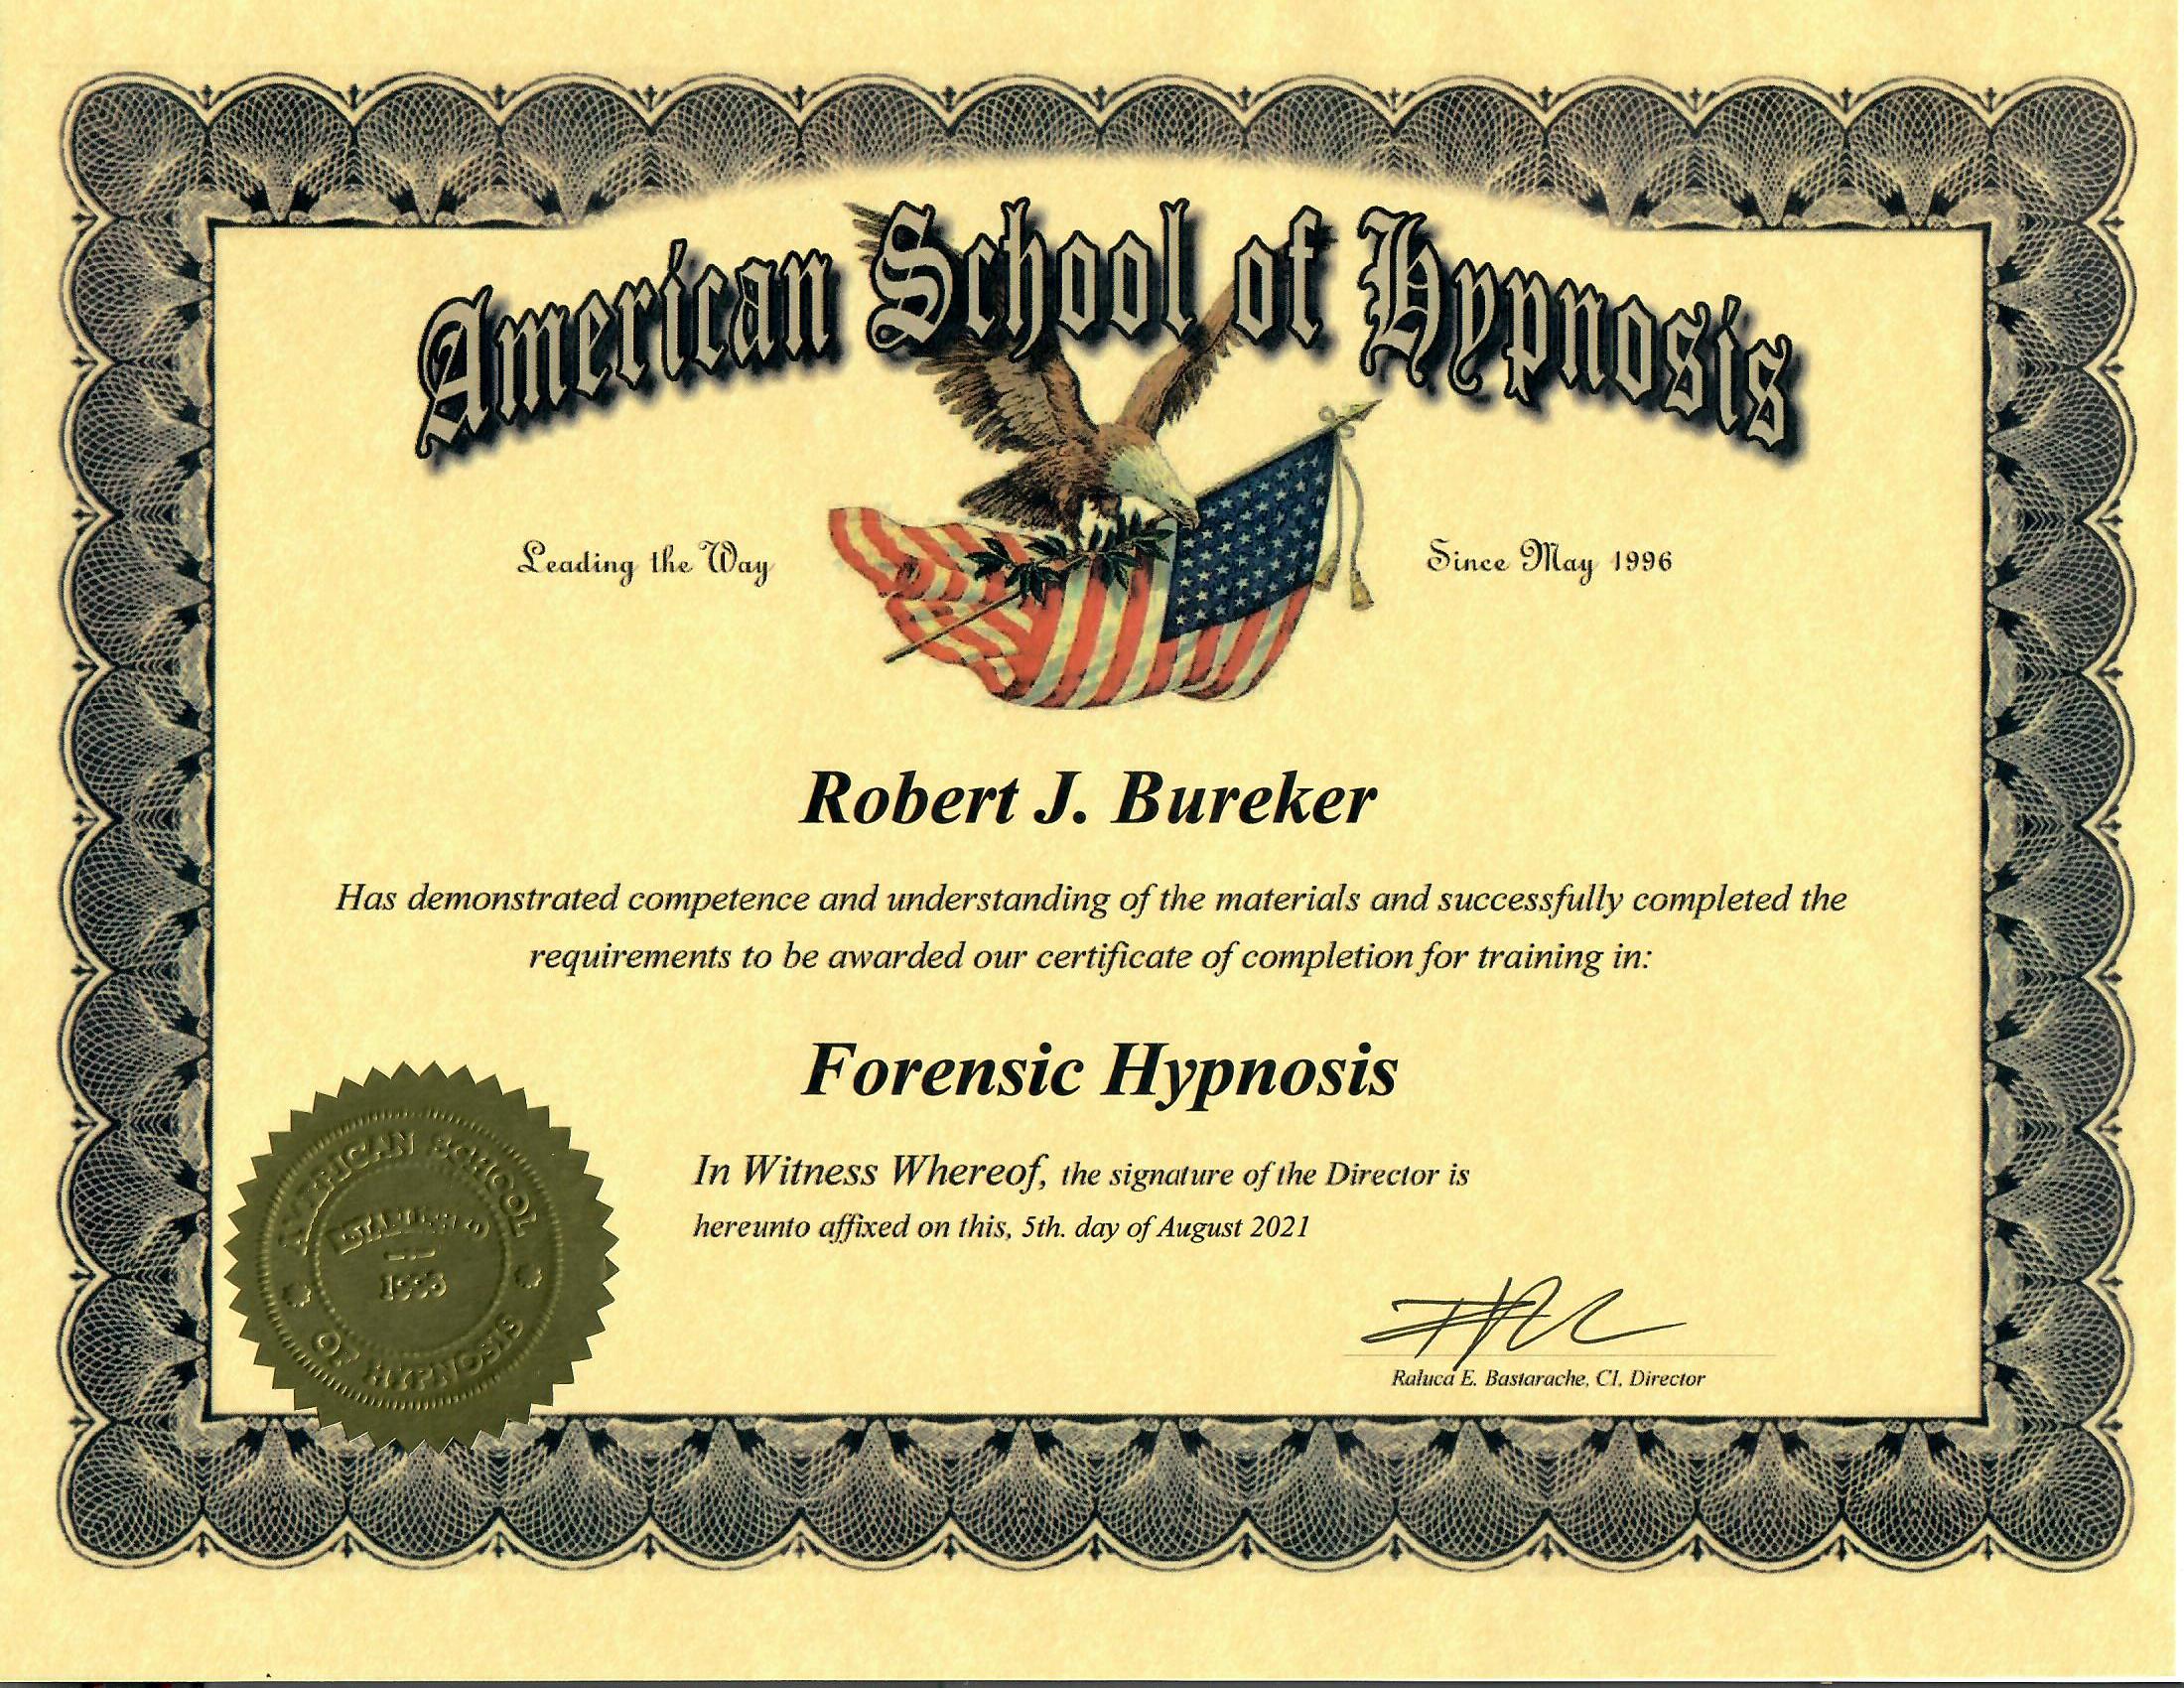 Froensic Hypnosis Certificate